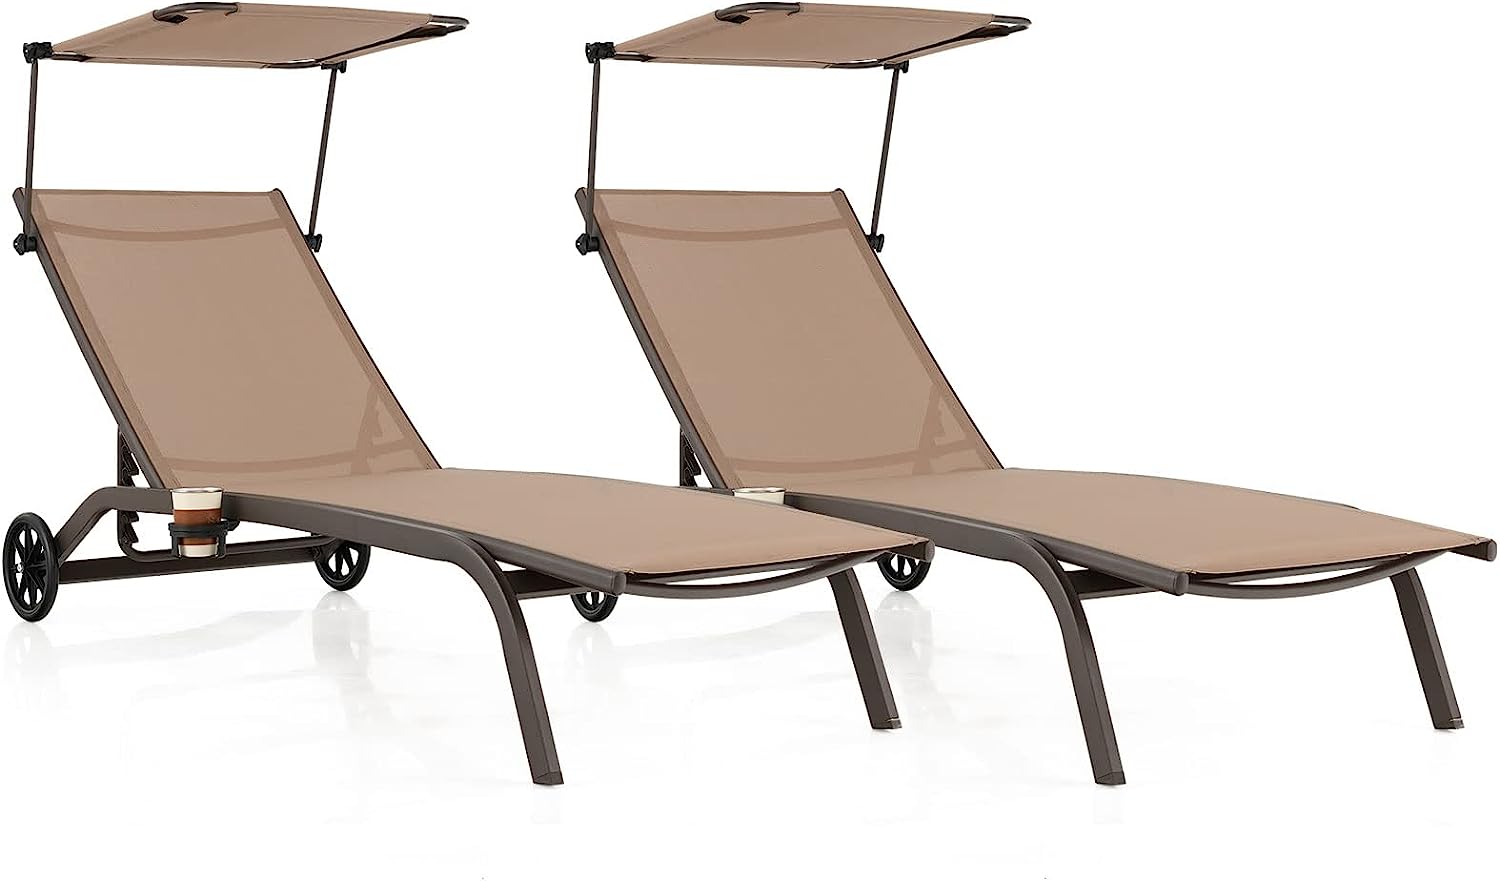 Giantex Outdoor Chaise Lounge Chair, Tanning Chair with Sunshade and Smooth Wheels, 6-Level Adjustable Position